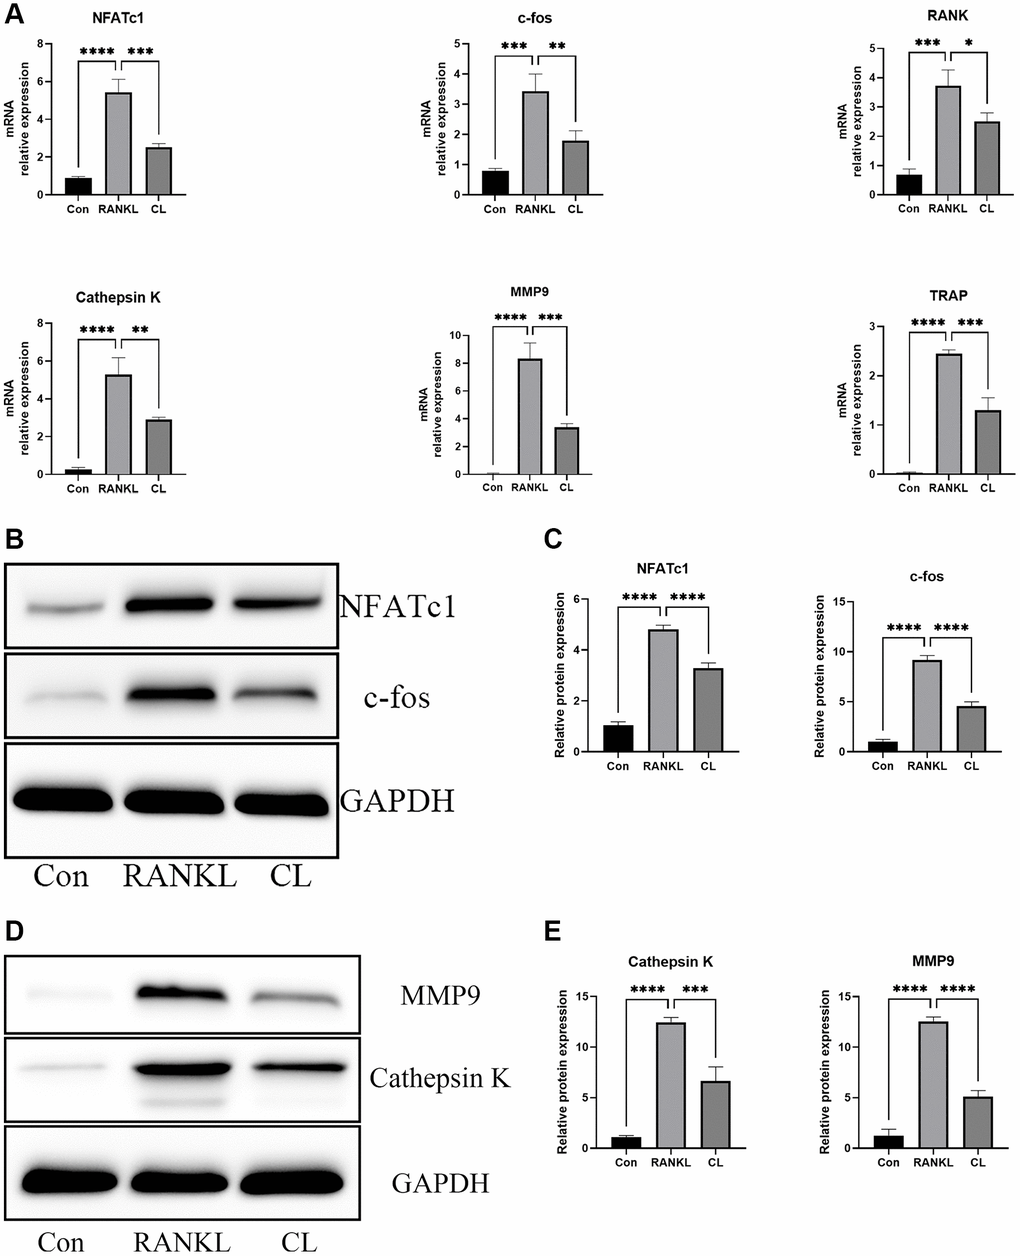 Inhibition of RANKL-induced NFATc1 and c-fos transcription and downstream related genes by CL. BMMs were treated with CL in osteoclast induction medium for 3 days. (A) The analysis of the relative mRNA levels of NFATc1, c-fos, RANK, Cathepsin K, MMP9, and TRAP. (B) The protein band image of NFATc1 and c-fos. (C) The expression quantifying of NFATc1 and c-fos. (D) The protein band image of Cathepsin K and MMP9. (E) The expression quantifying of Cathepsin K and MMP9. *P **P ***P ****P 